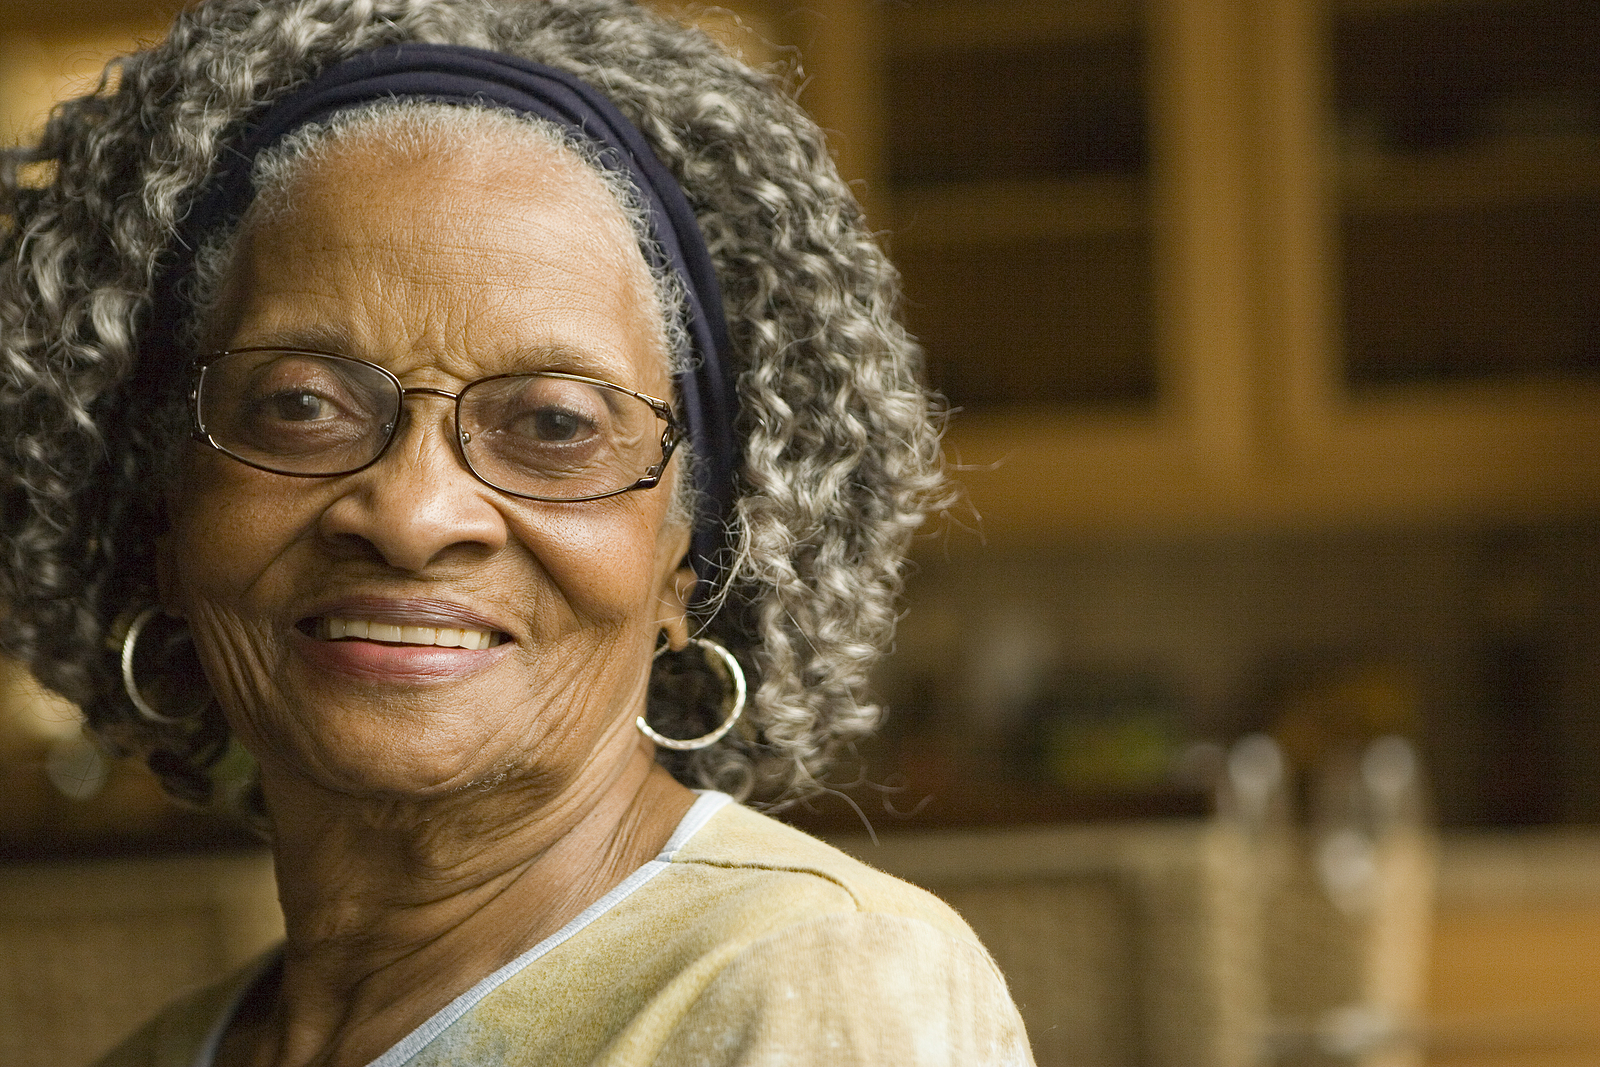 8 Warning Signs that an Aging Adult Needs Home Care Assistance